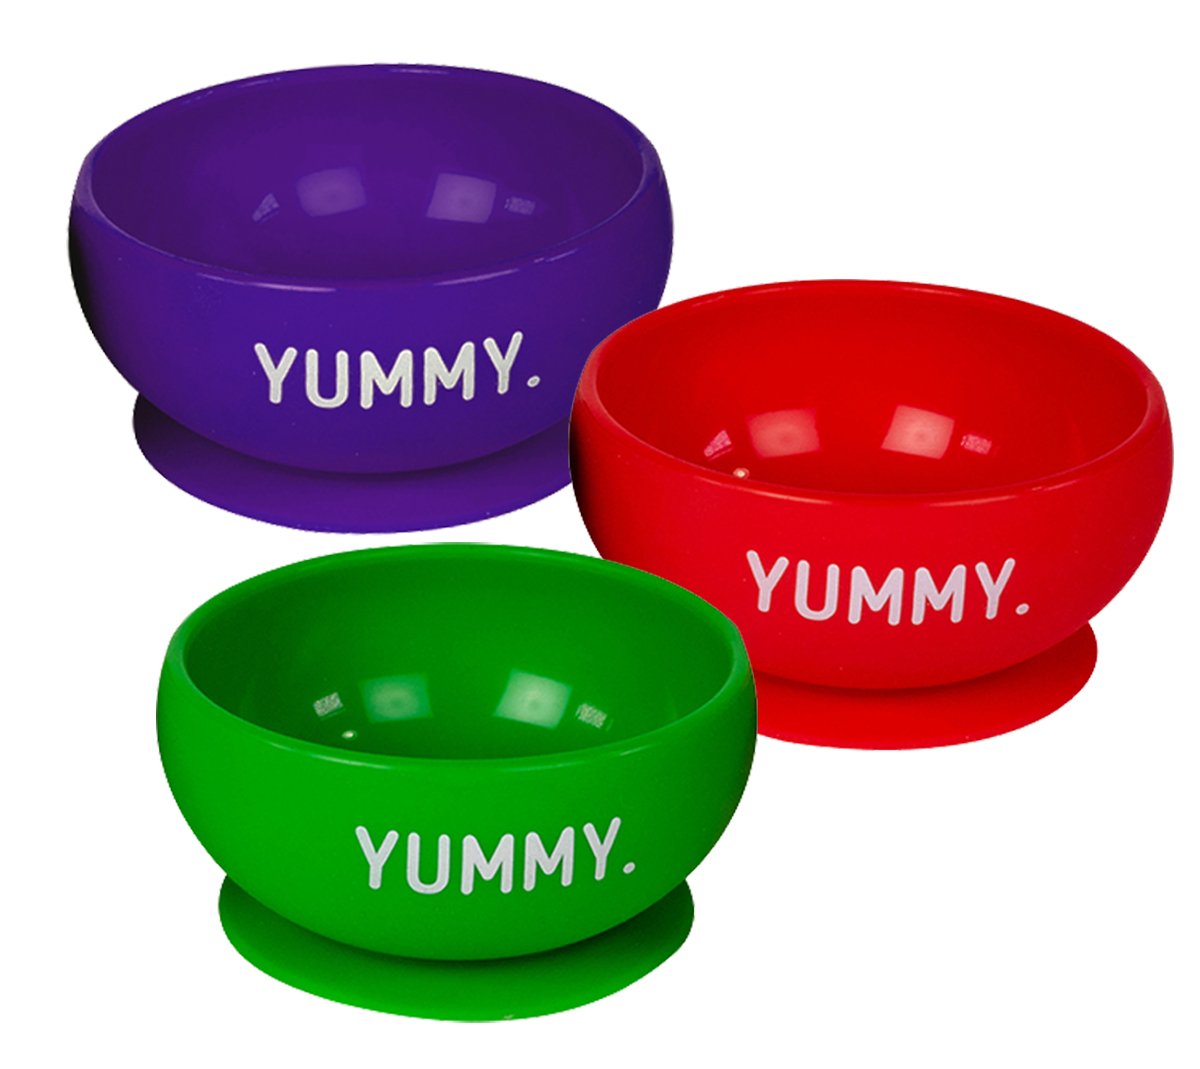 https://www.freshbaby.com/wp-content/uploads/YUMMY-Suction-Bowl-Assorted-Colors.jpg